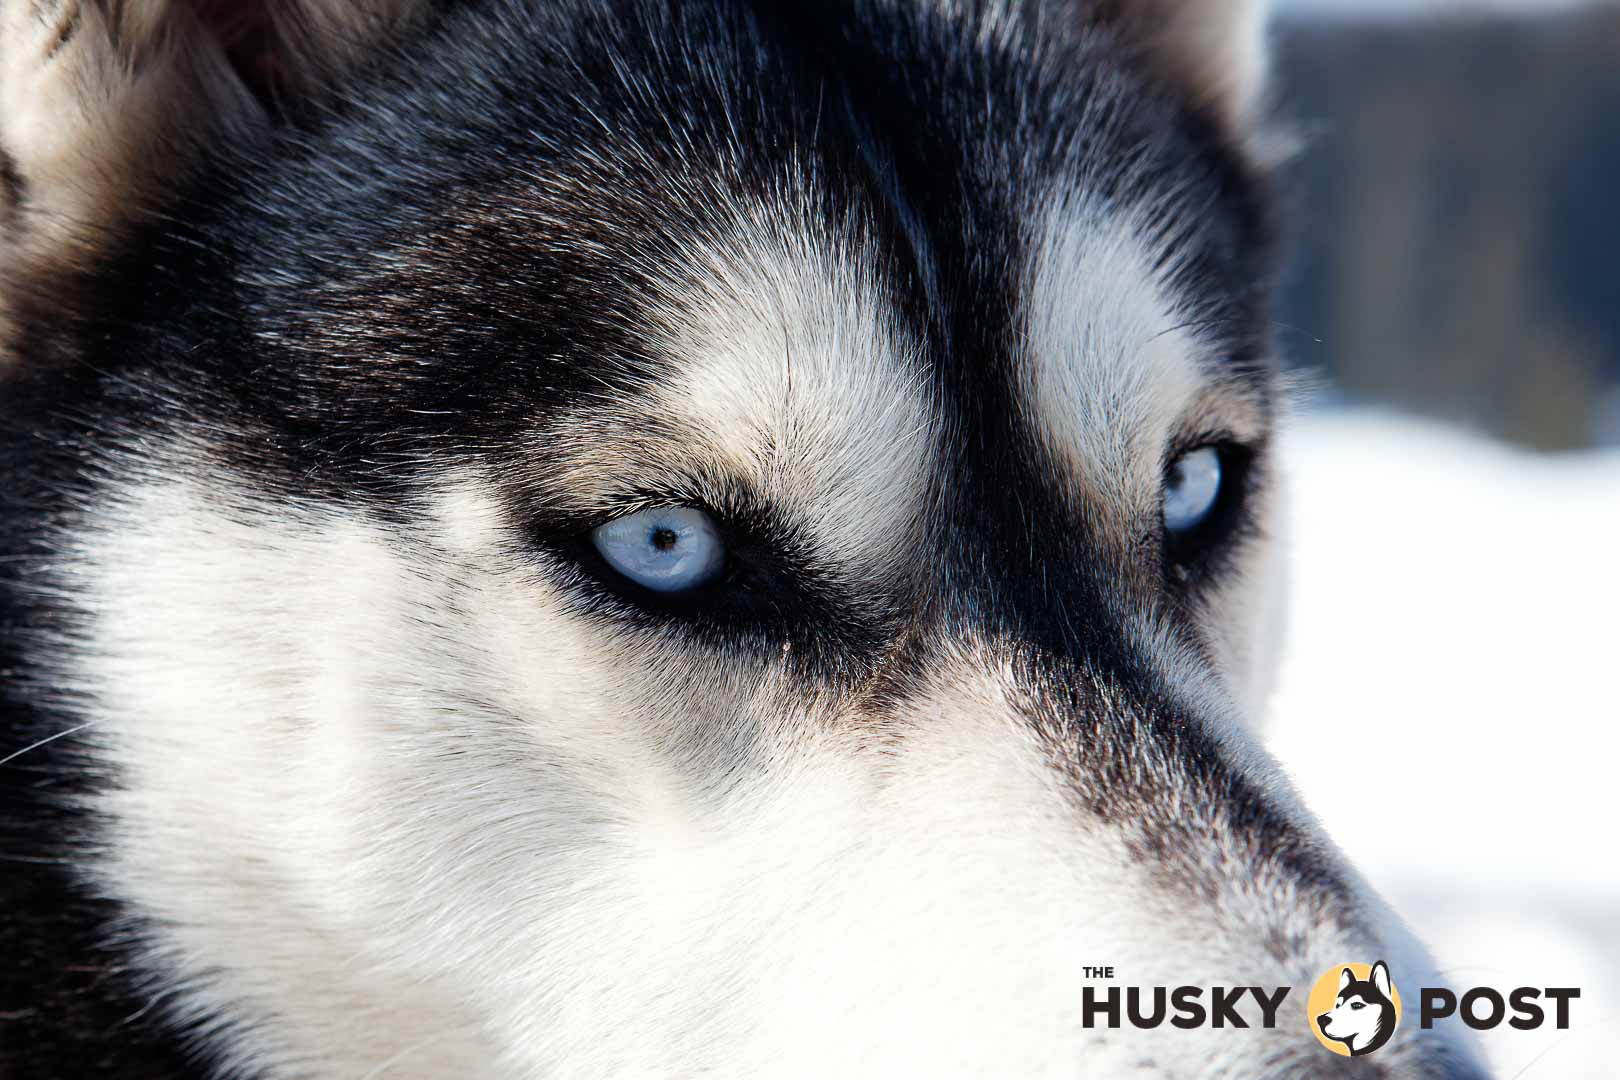 Why does the Siberian Husky have blue eyes?